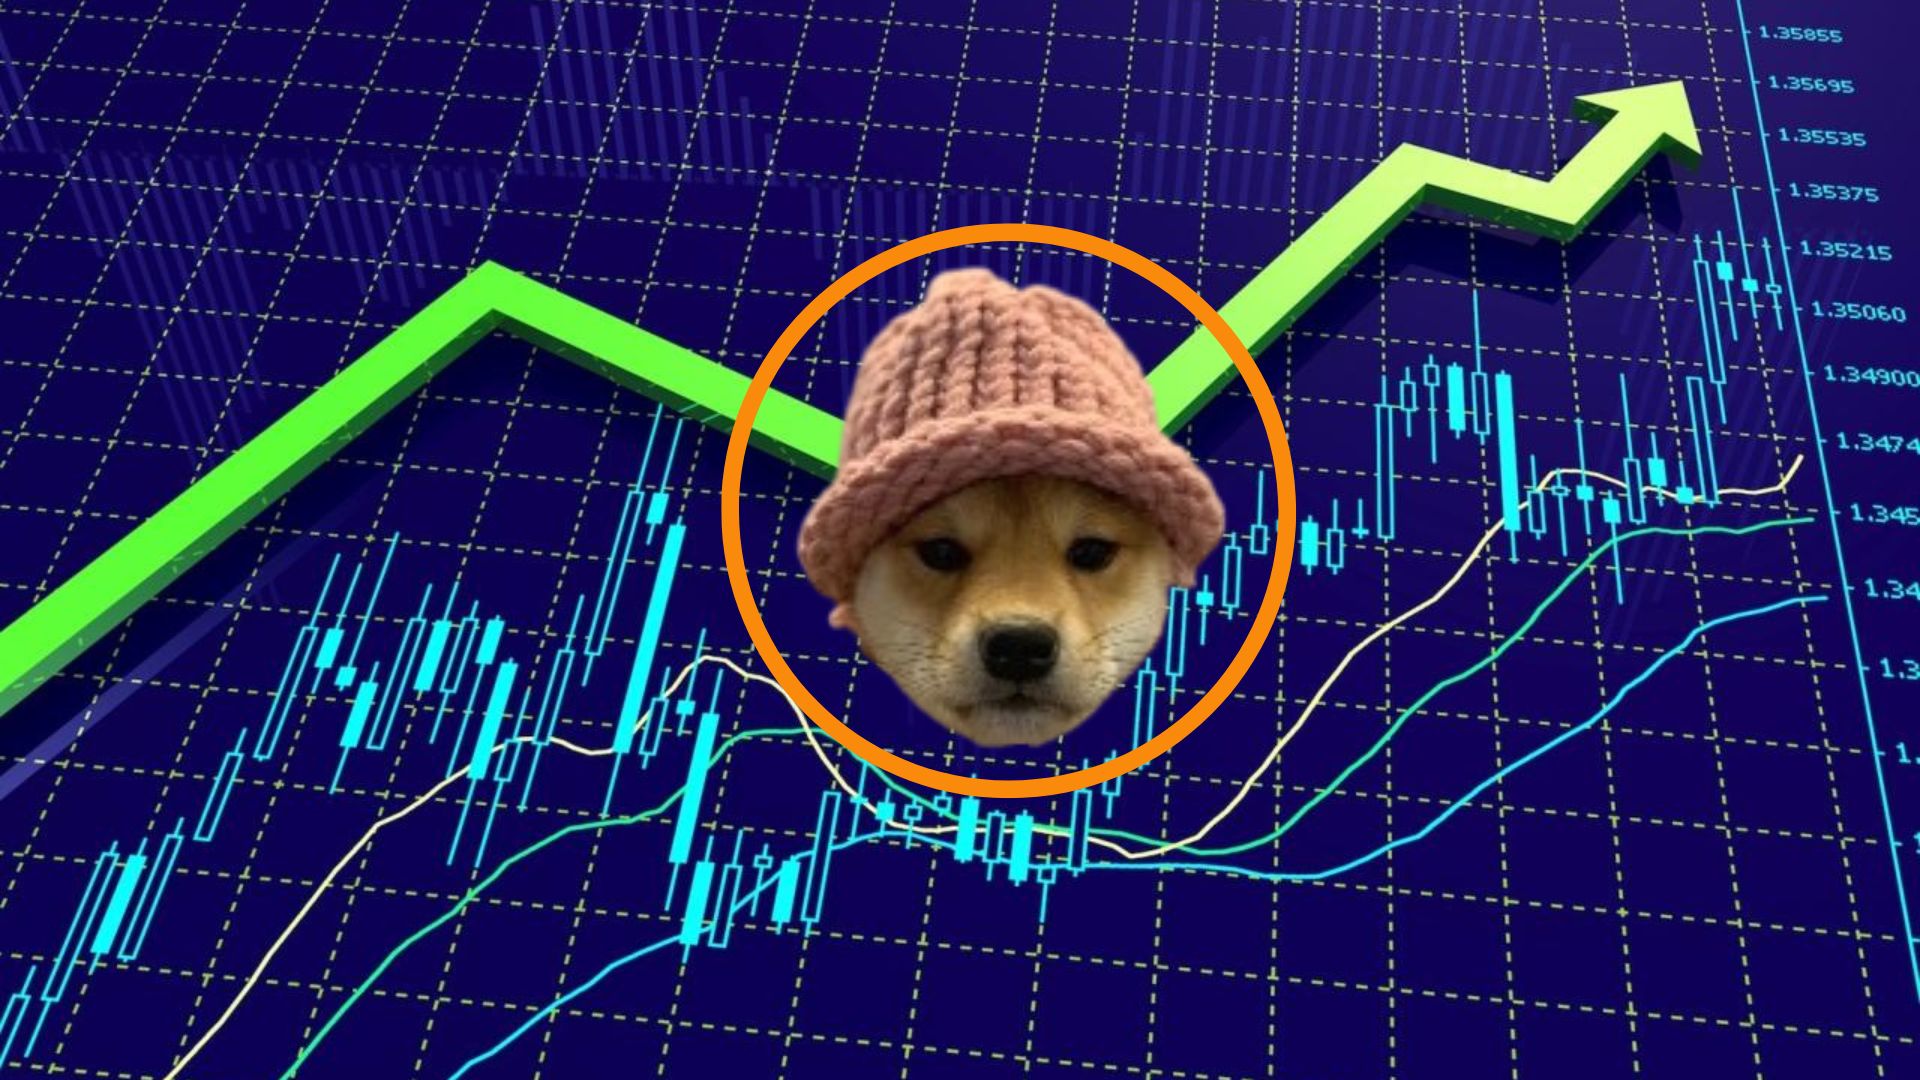 Dogwifhat Price Prediction: WIF Jumps 5% As Traders Send $6.8 Million To New Solana Meme Coin Slothana